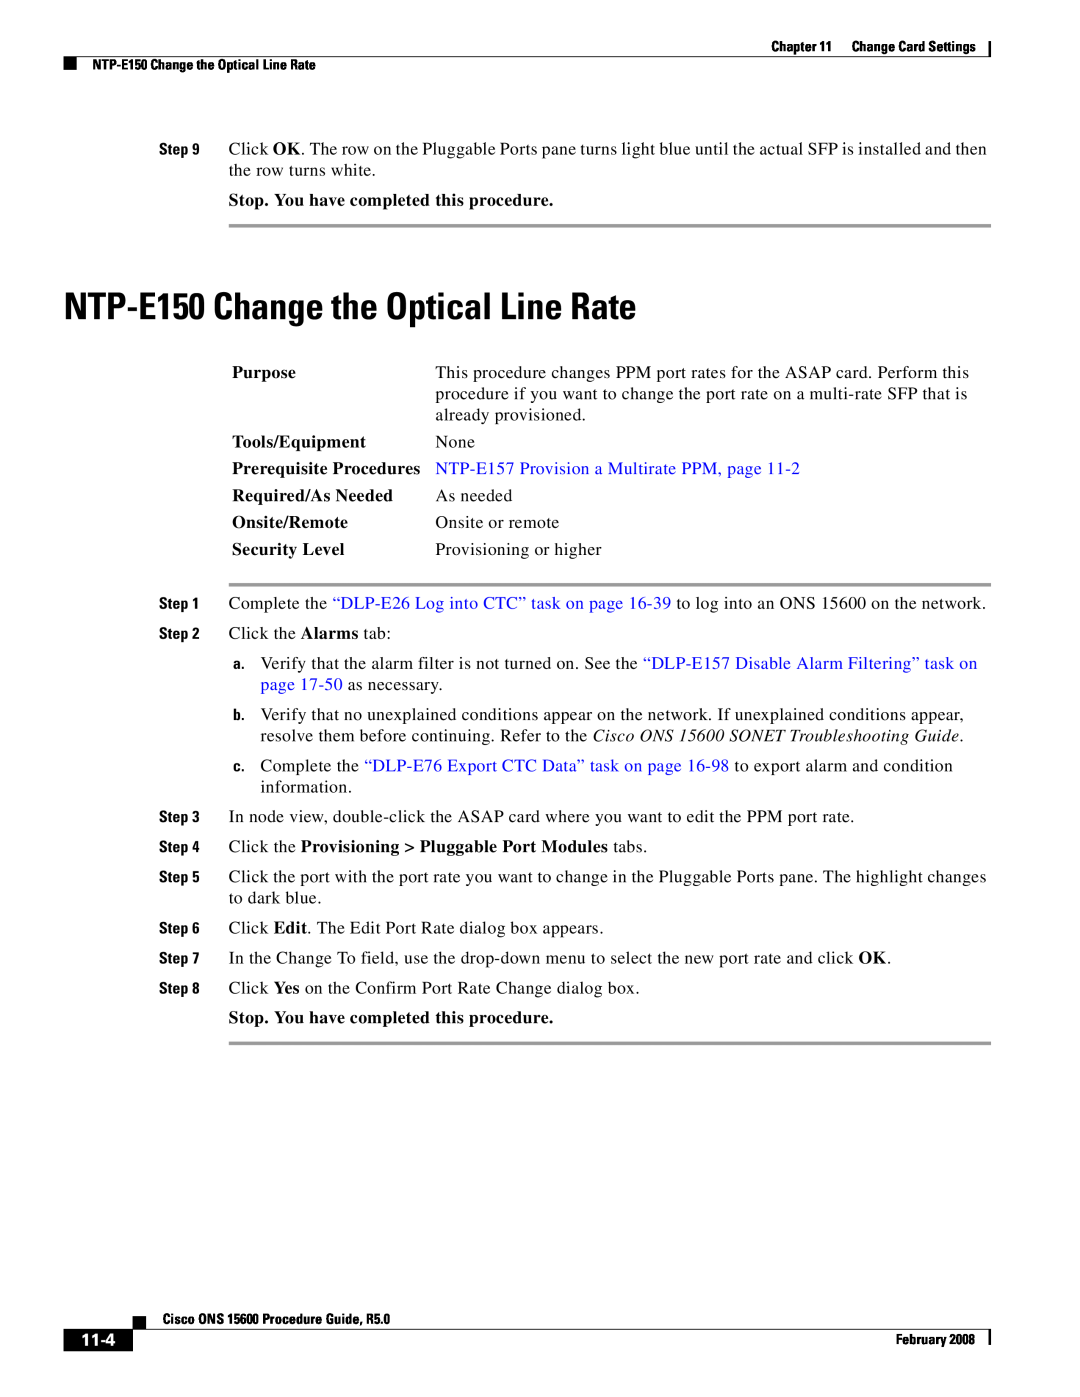 Cisco Systems ONS 15600 NTP-E150 Change the Optical Line Rate, NTP-E157 Provision a Multirate PPM, page, 11-4, Purpose 